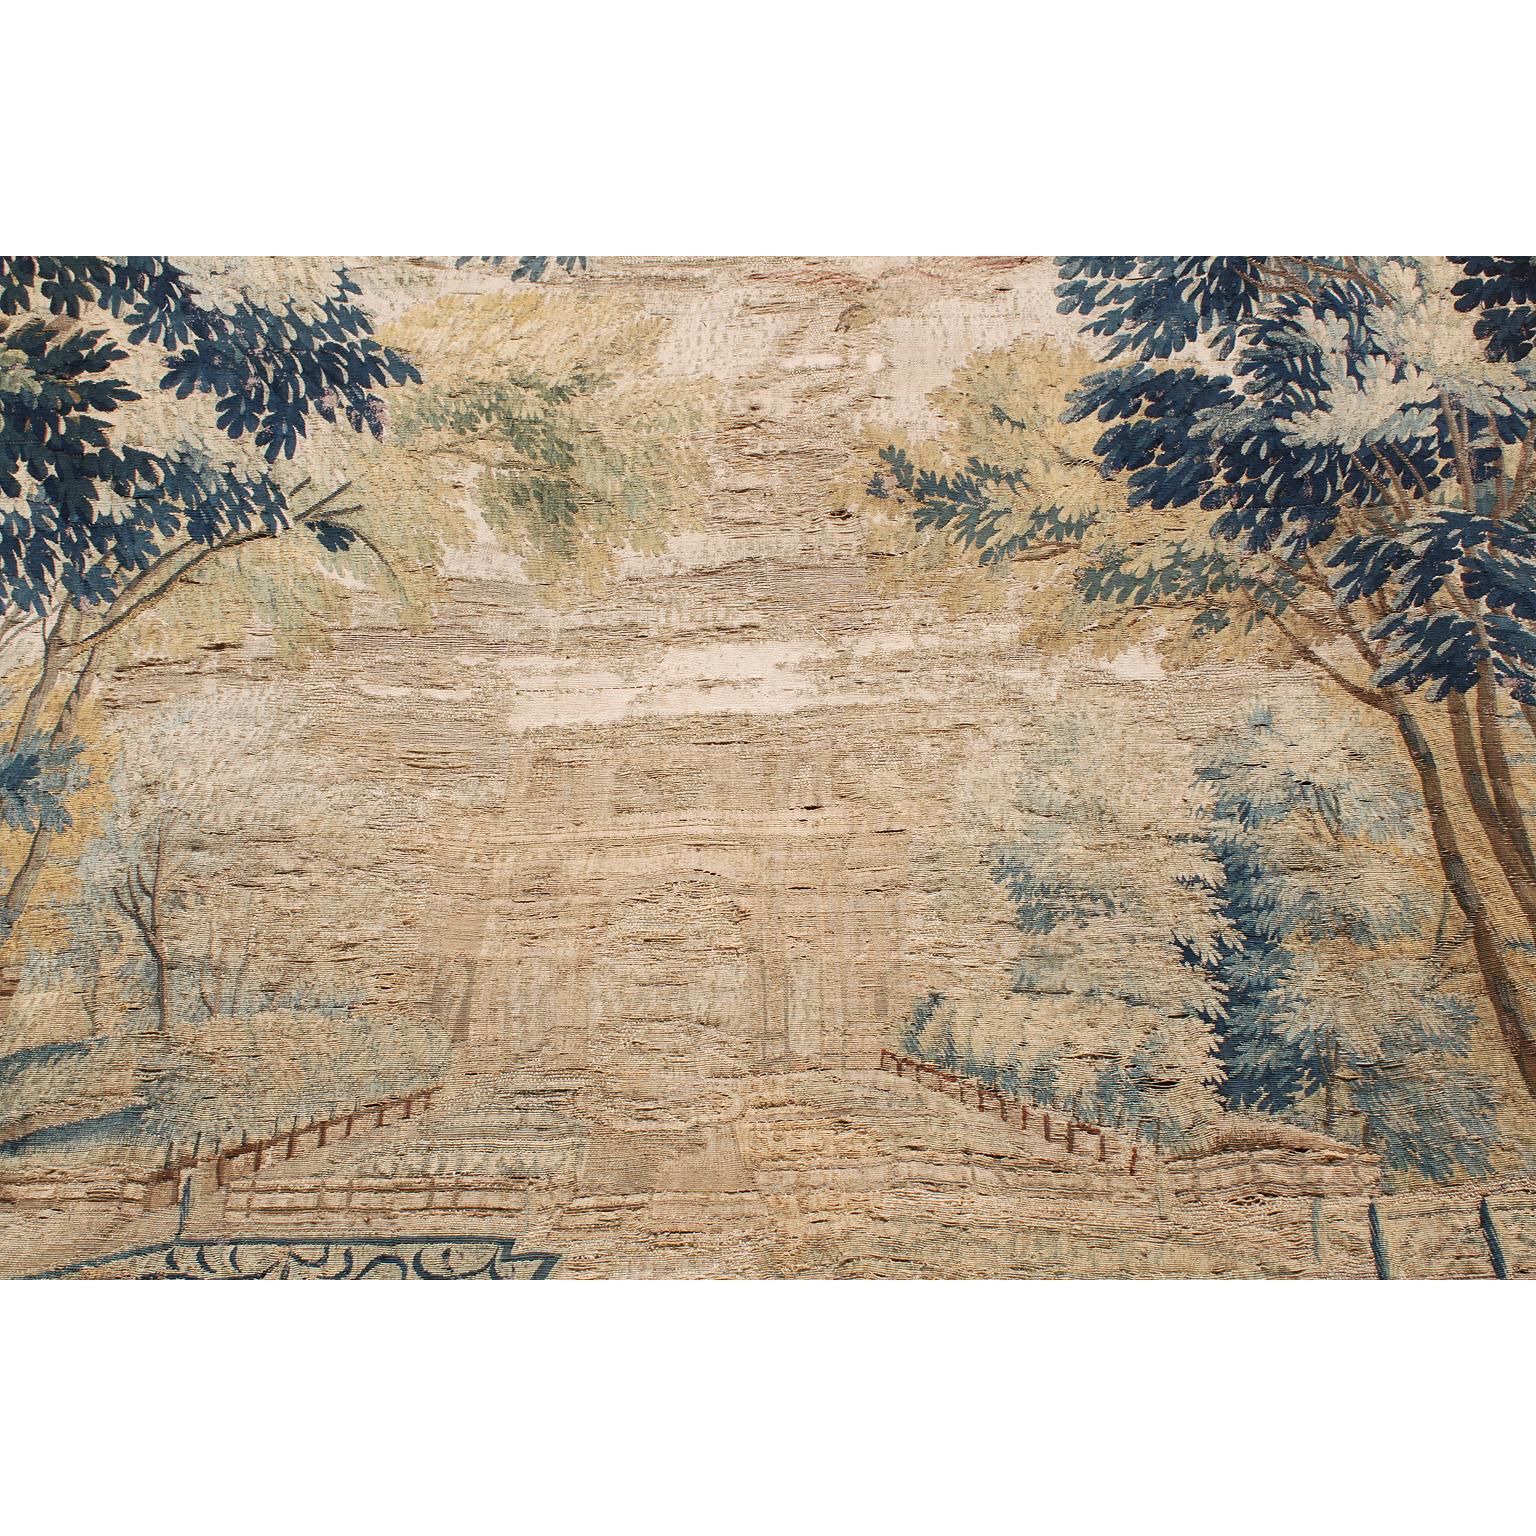 Large Flemish 17th-18th Century Baroque Pictorial Tapestry 